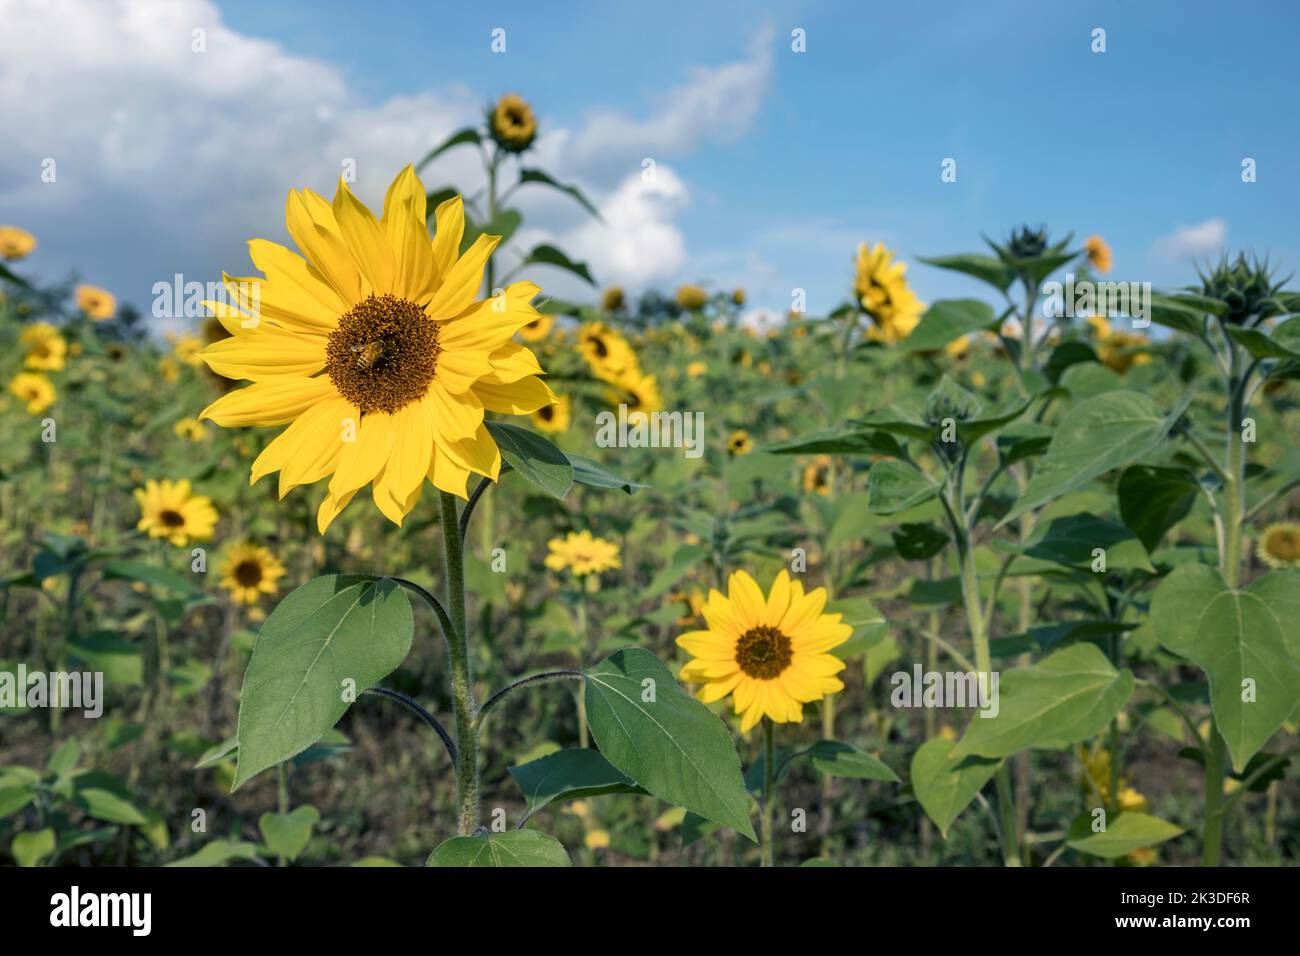 Sunflowers field over blue bright sky background Stock Photo